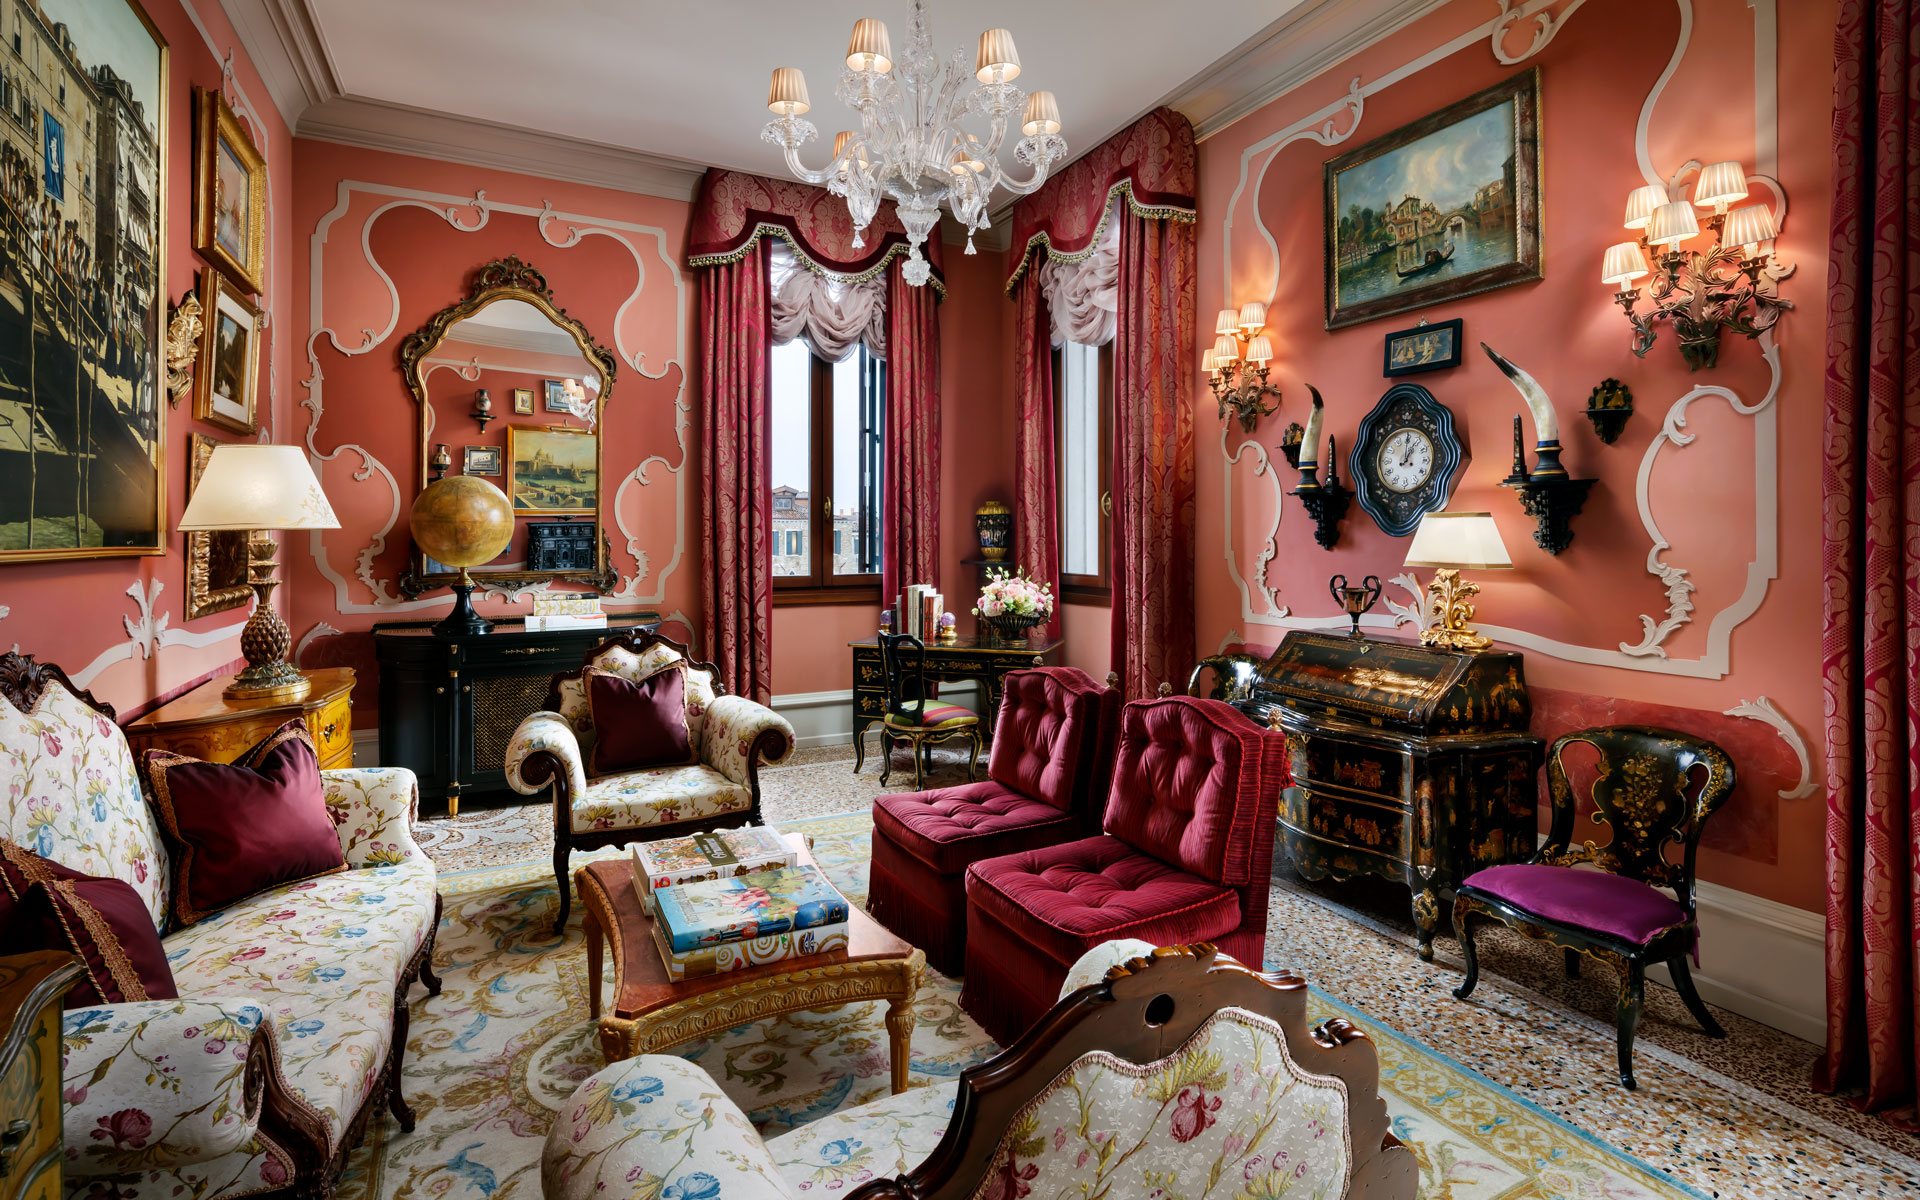 9 of the World's Most Famous Hotel Rooms and their Legendary Guests -  Galerie